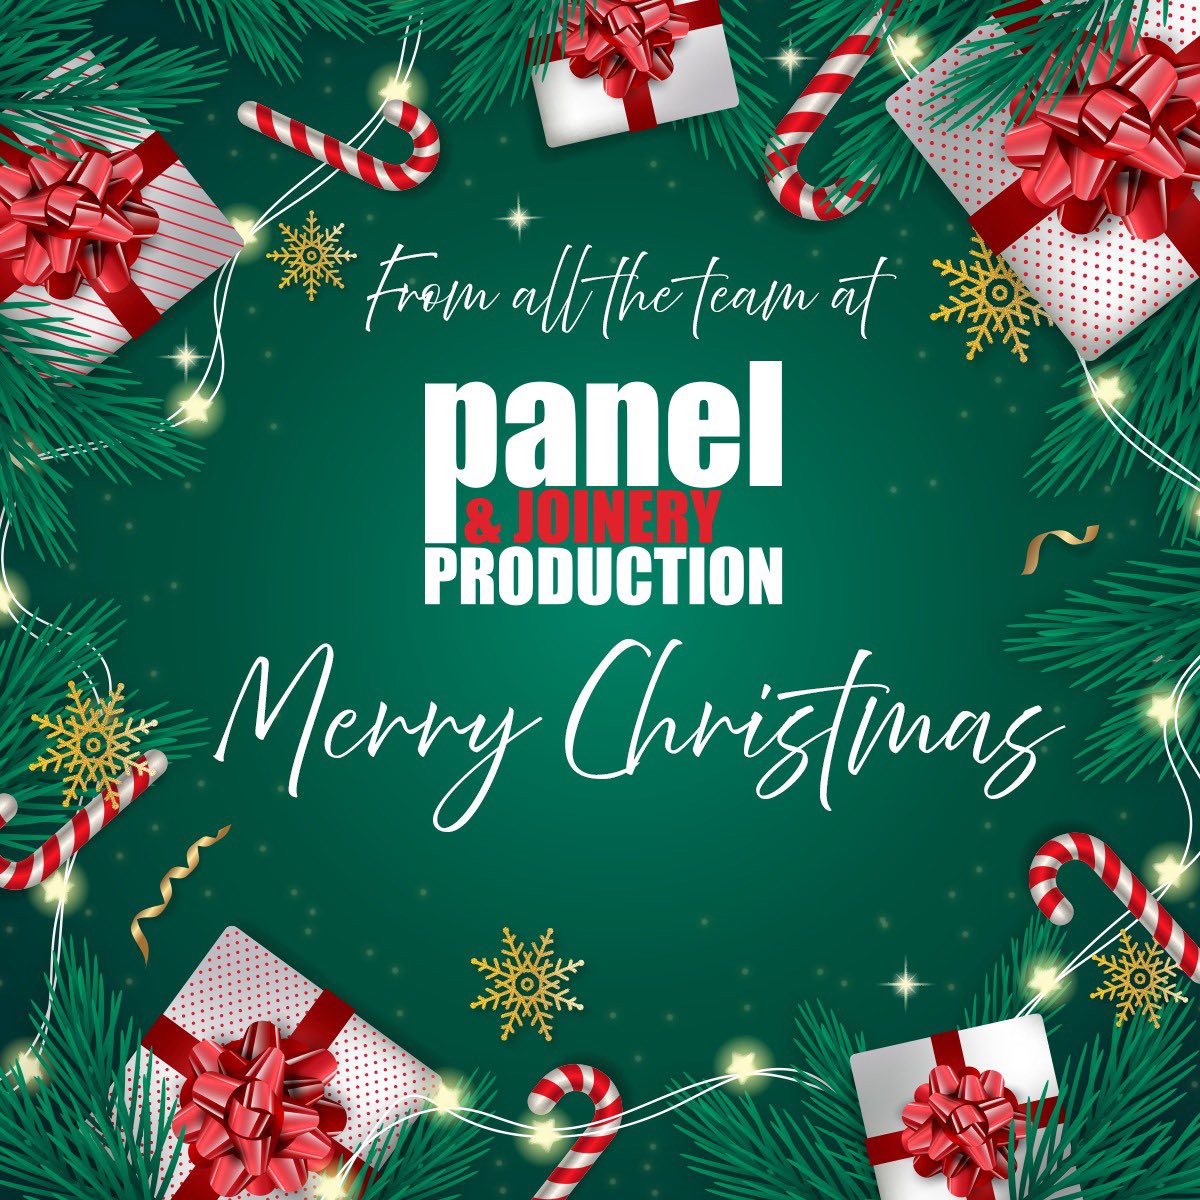 Merry Christmas from all the team at Panel & Joinery Production 🎄
.
.
. 
.
#woodworkingmachinery #panels #wood #dustextraction #saws #homag #routing #decorativepanels #boards #components #joinery #cutting #furniturefittings #furnituremanufacturing #handling